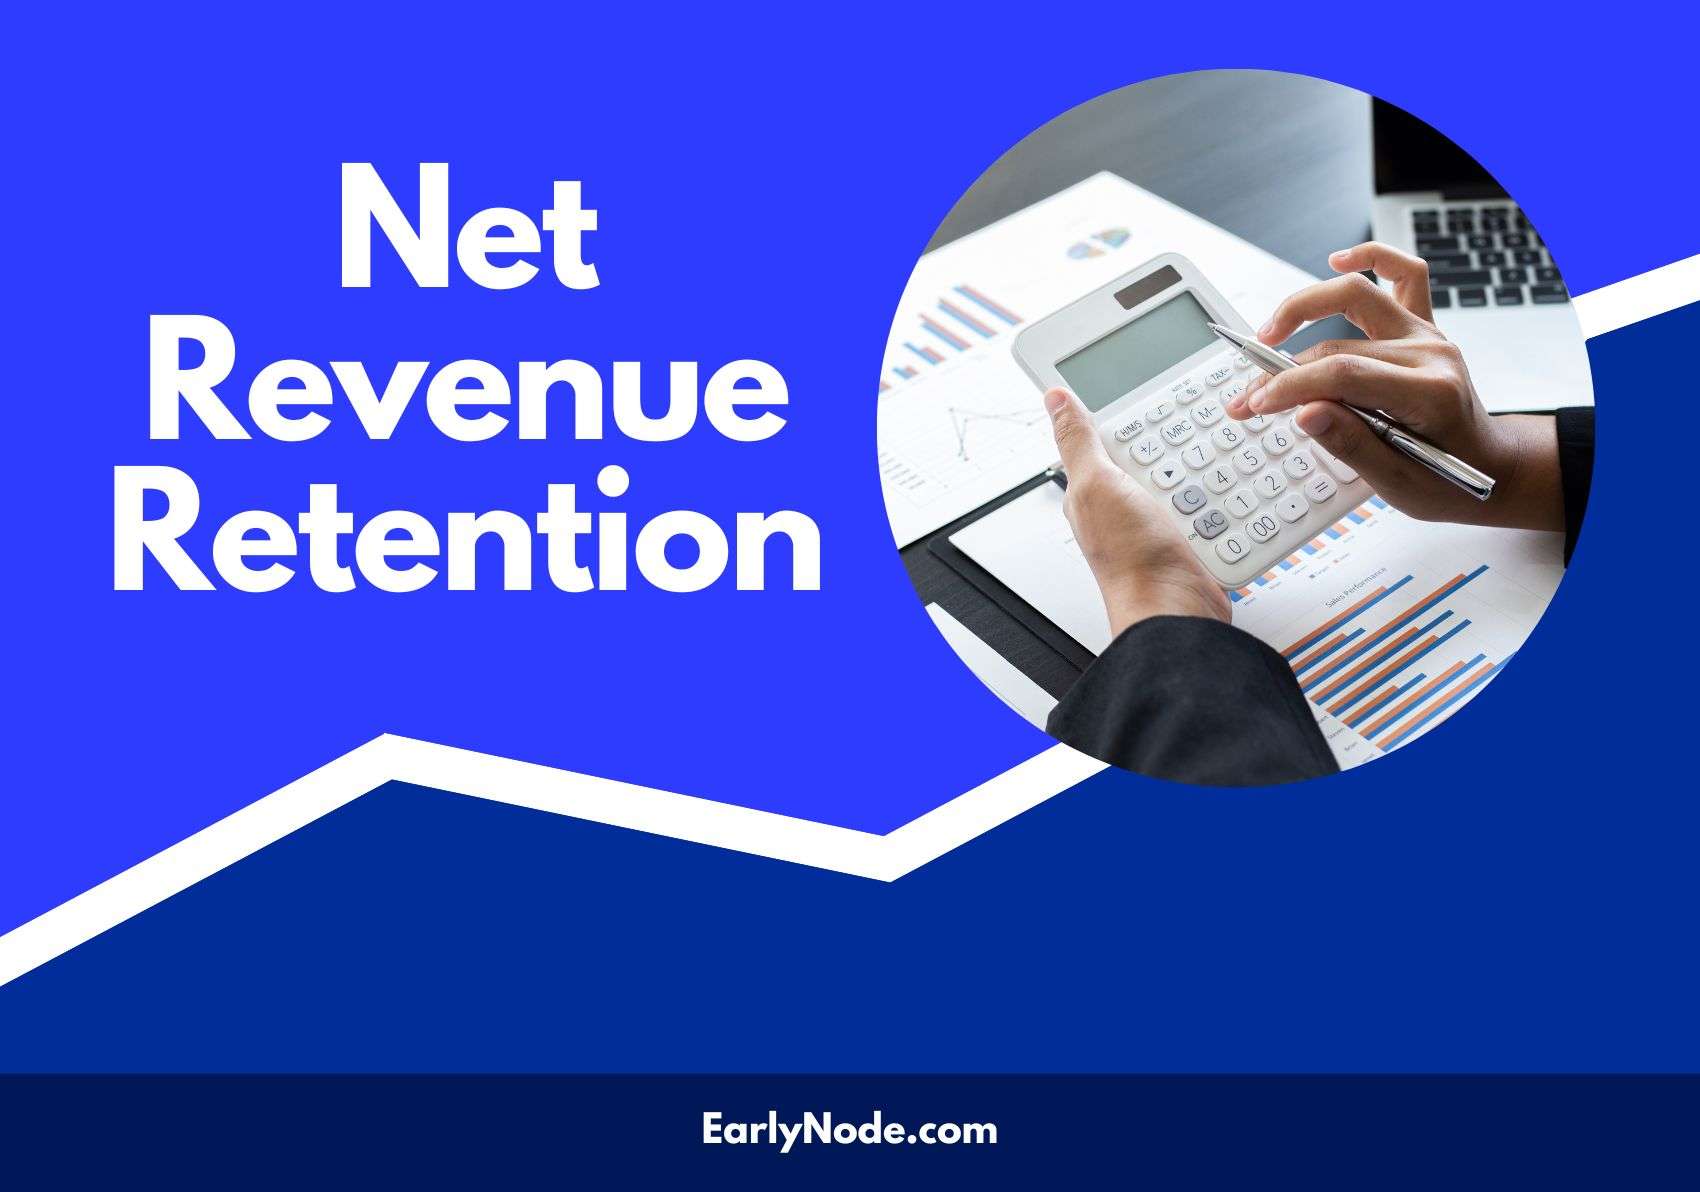 How to Calculate Net Revenue Retention in B2B SaaS